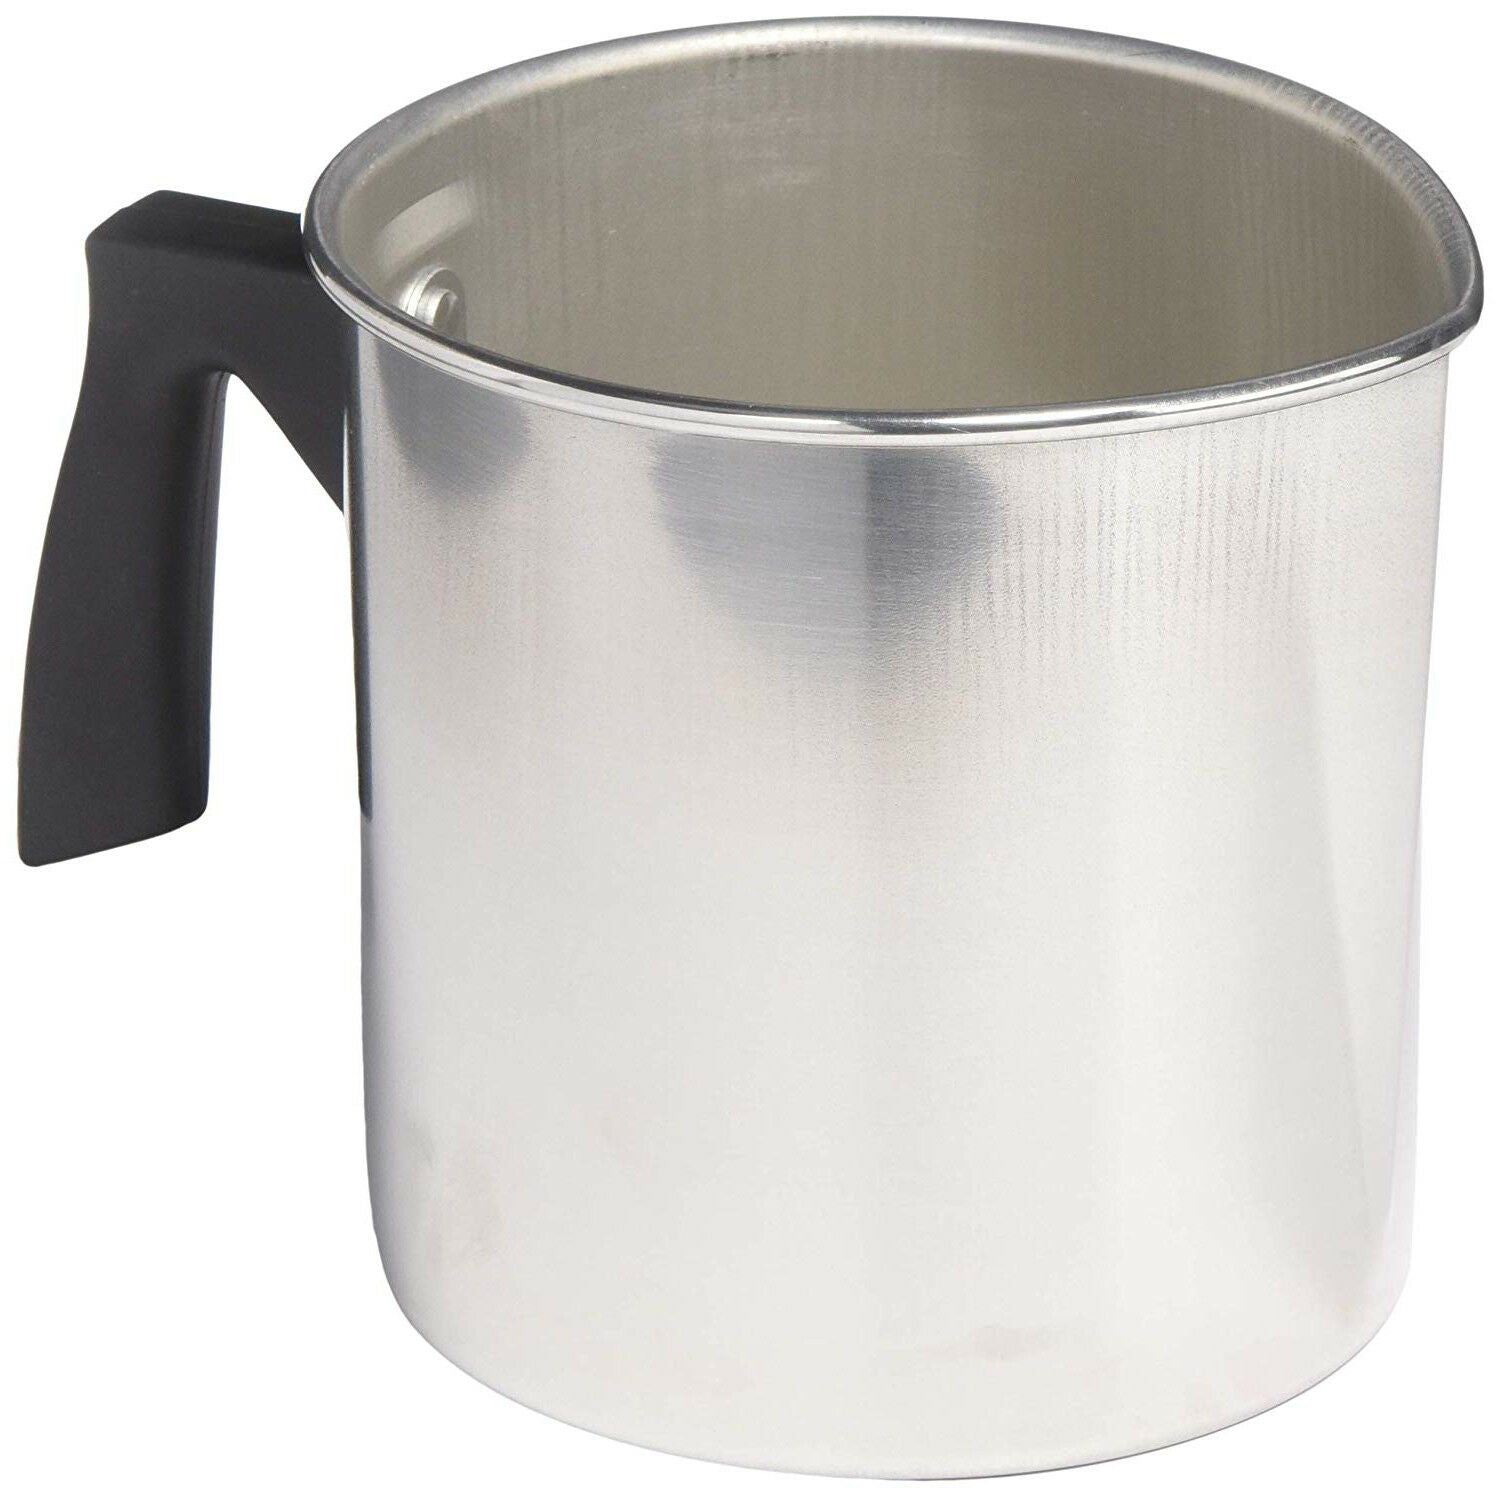 Haavpoois Candle Wax Melting Pot,3l Dripless Pouring Pitcher